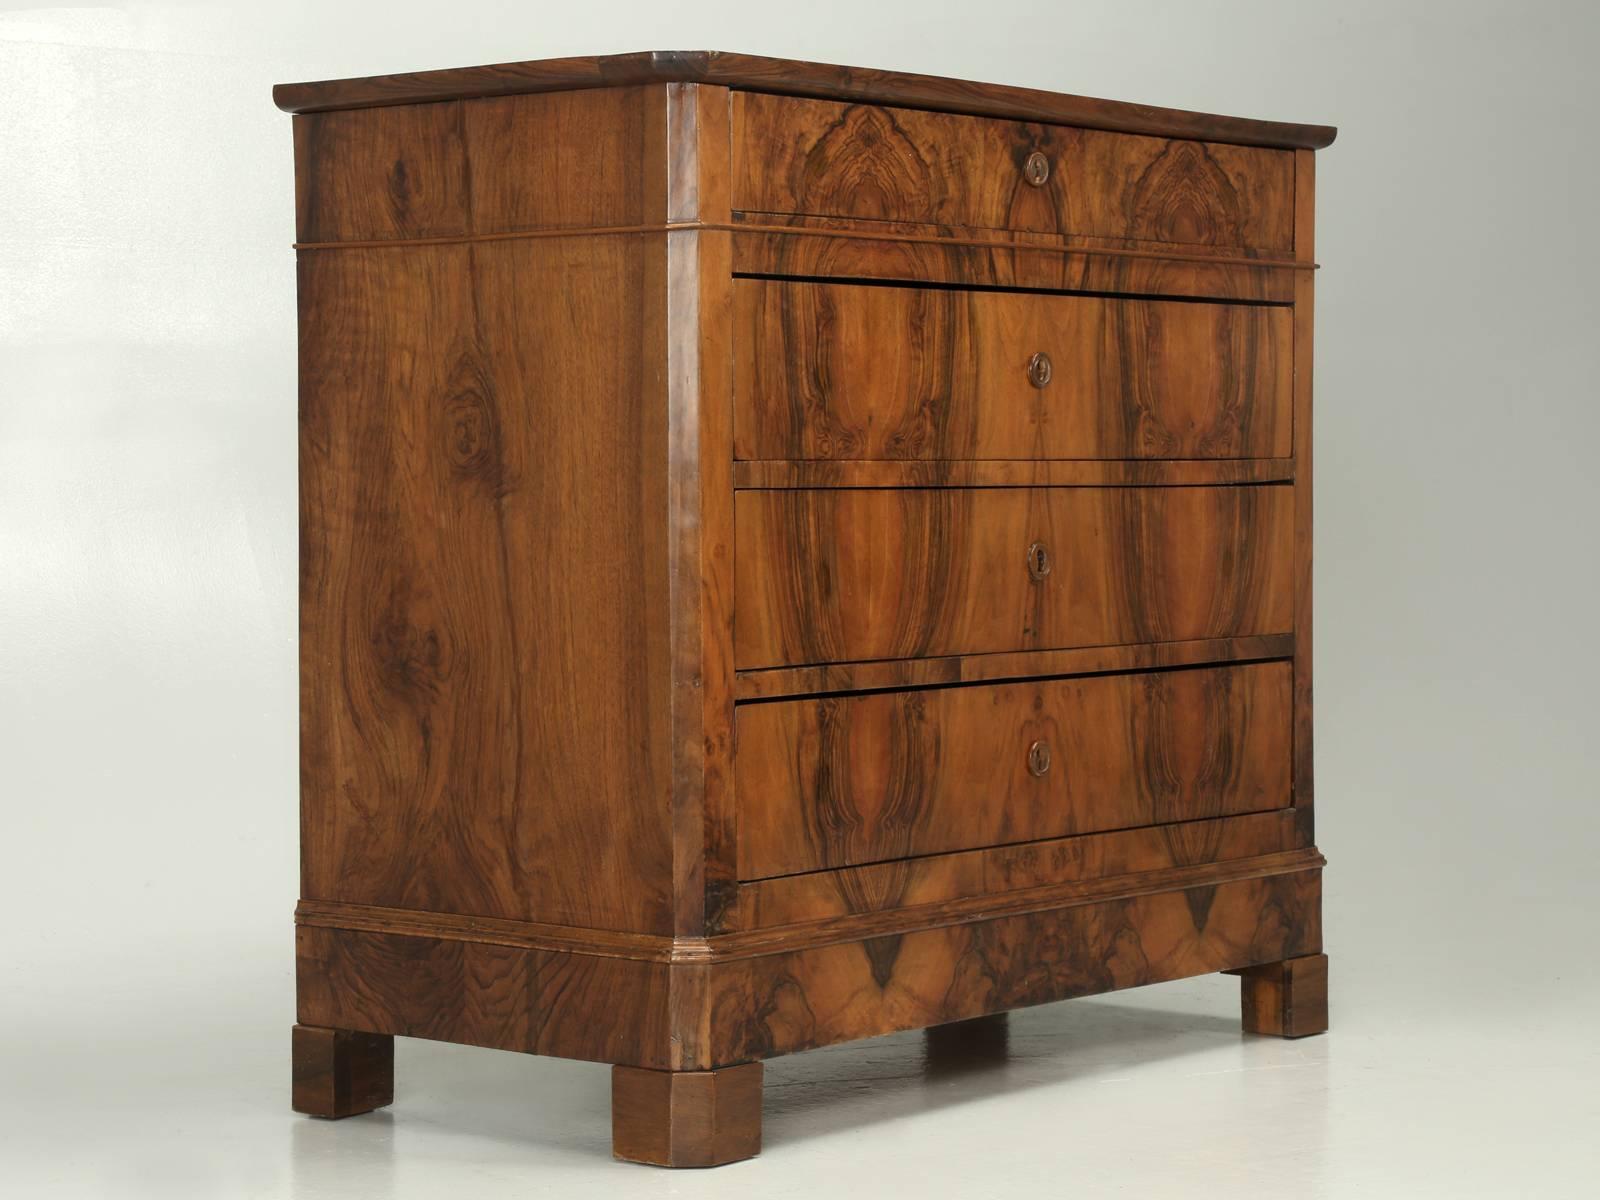 Antique French Louis Philippe commode or chest of drawers in bookmatched walnut. Our Old Plank restoration department, spent over 30-days restoring this antique French commode. We started by rebuilding the interior, so that the drawers would slide,